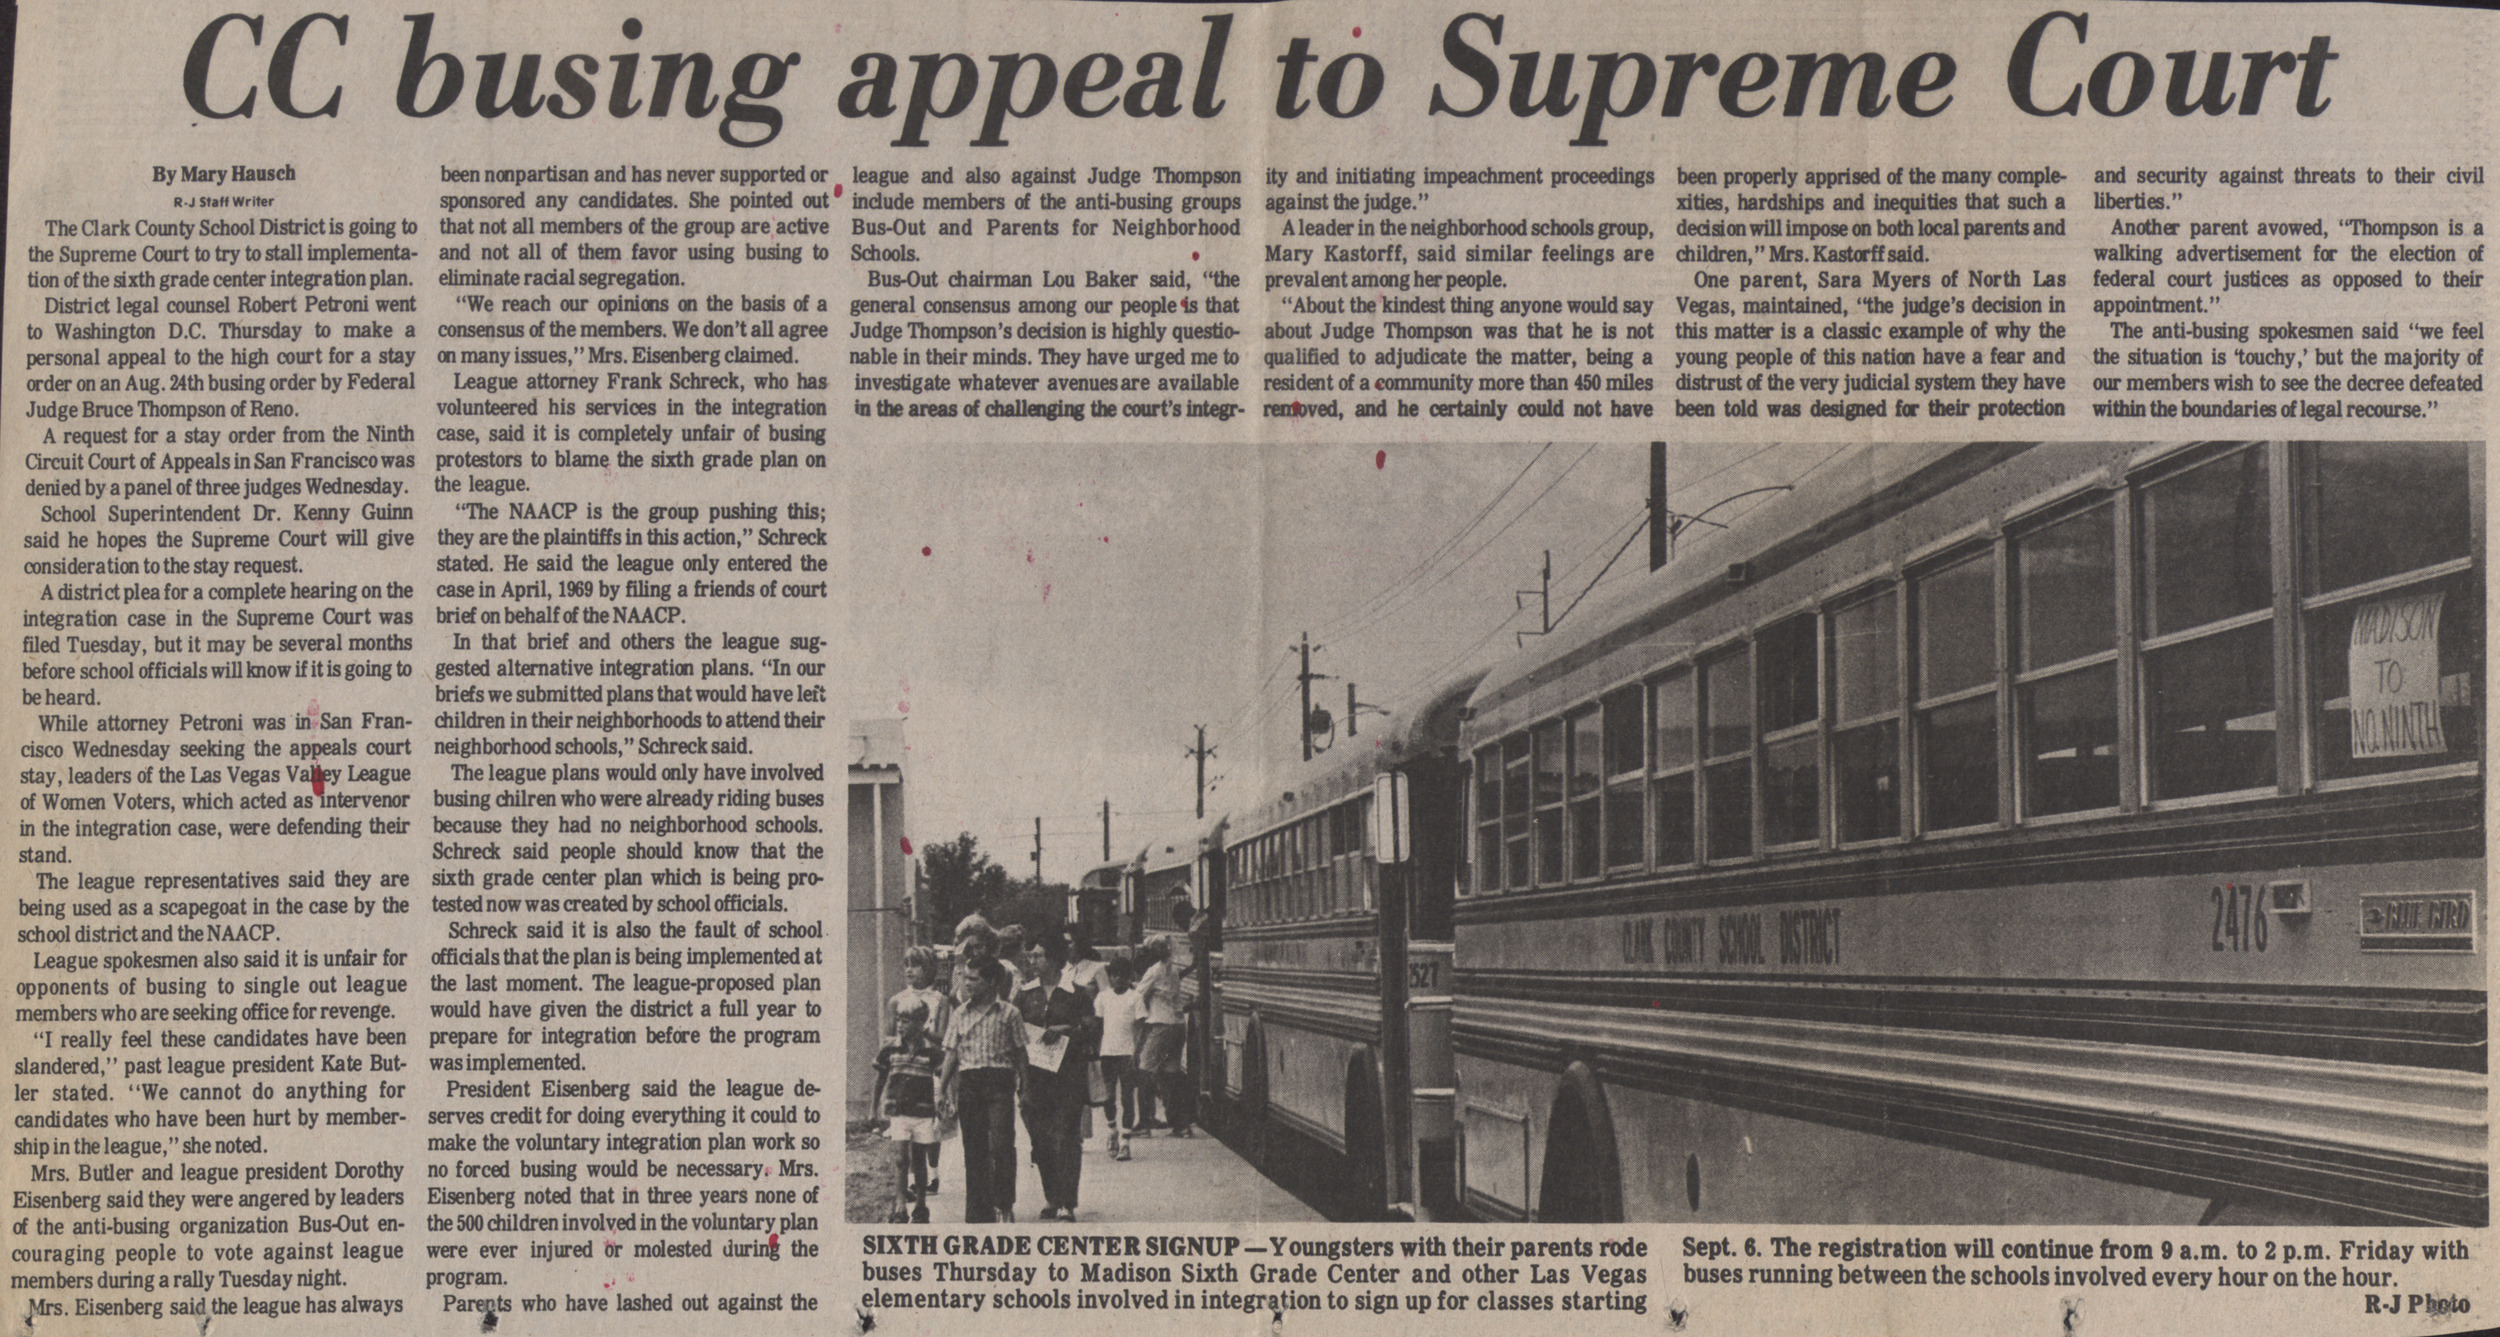 Newspaper clipping, CC busing appeal to Supreme Court, Las Vegas Review-Journal, August 31, 1972